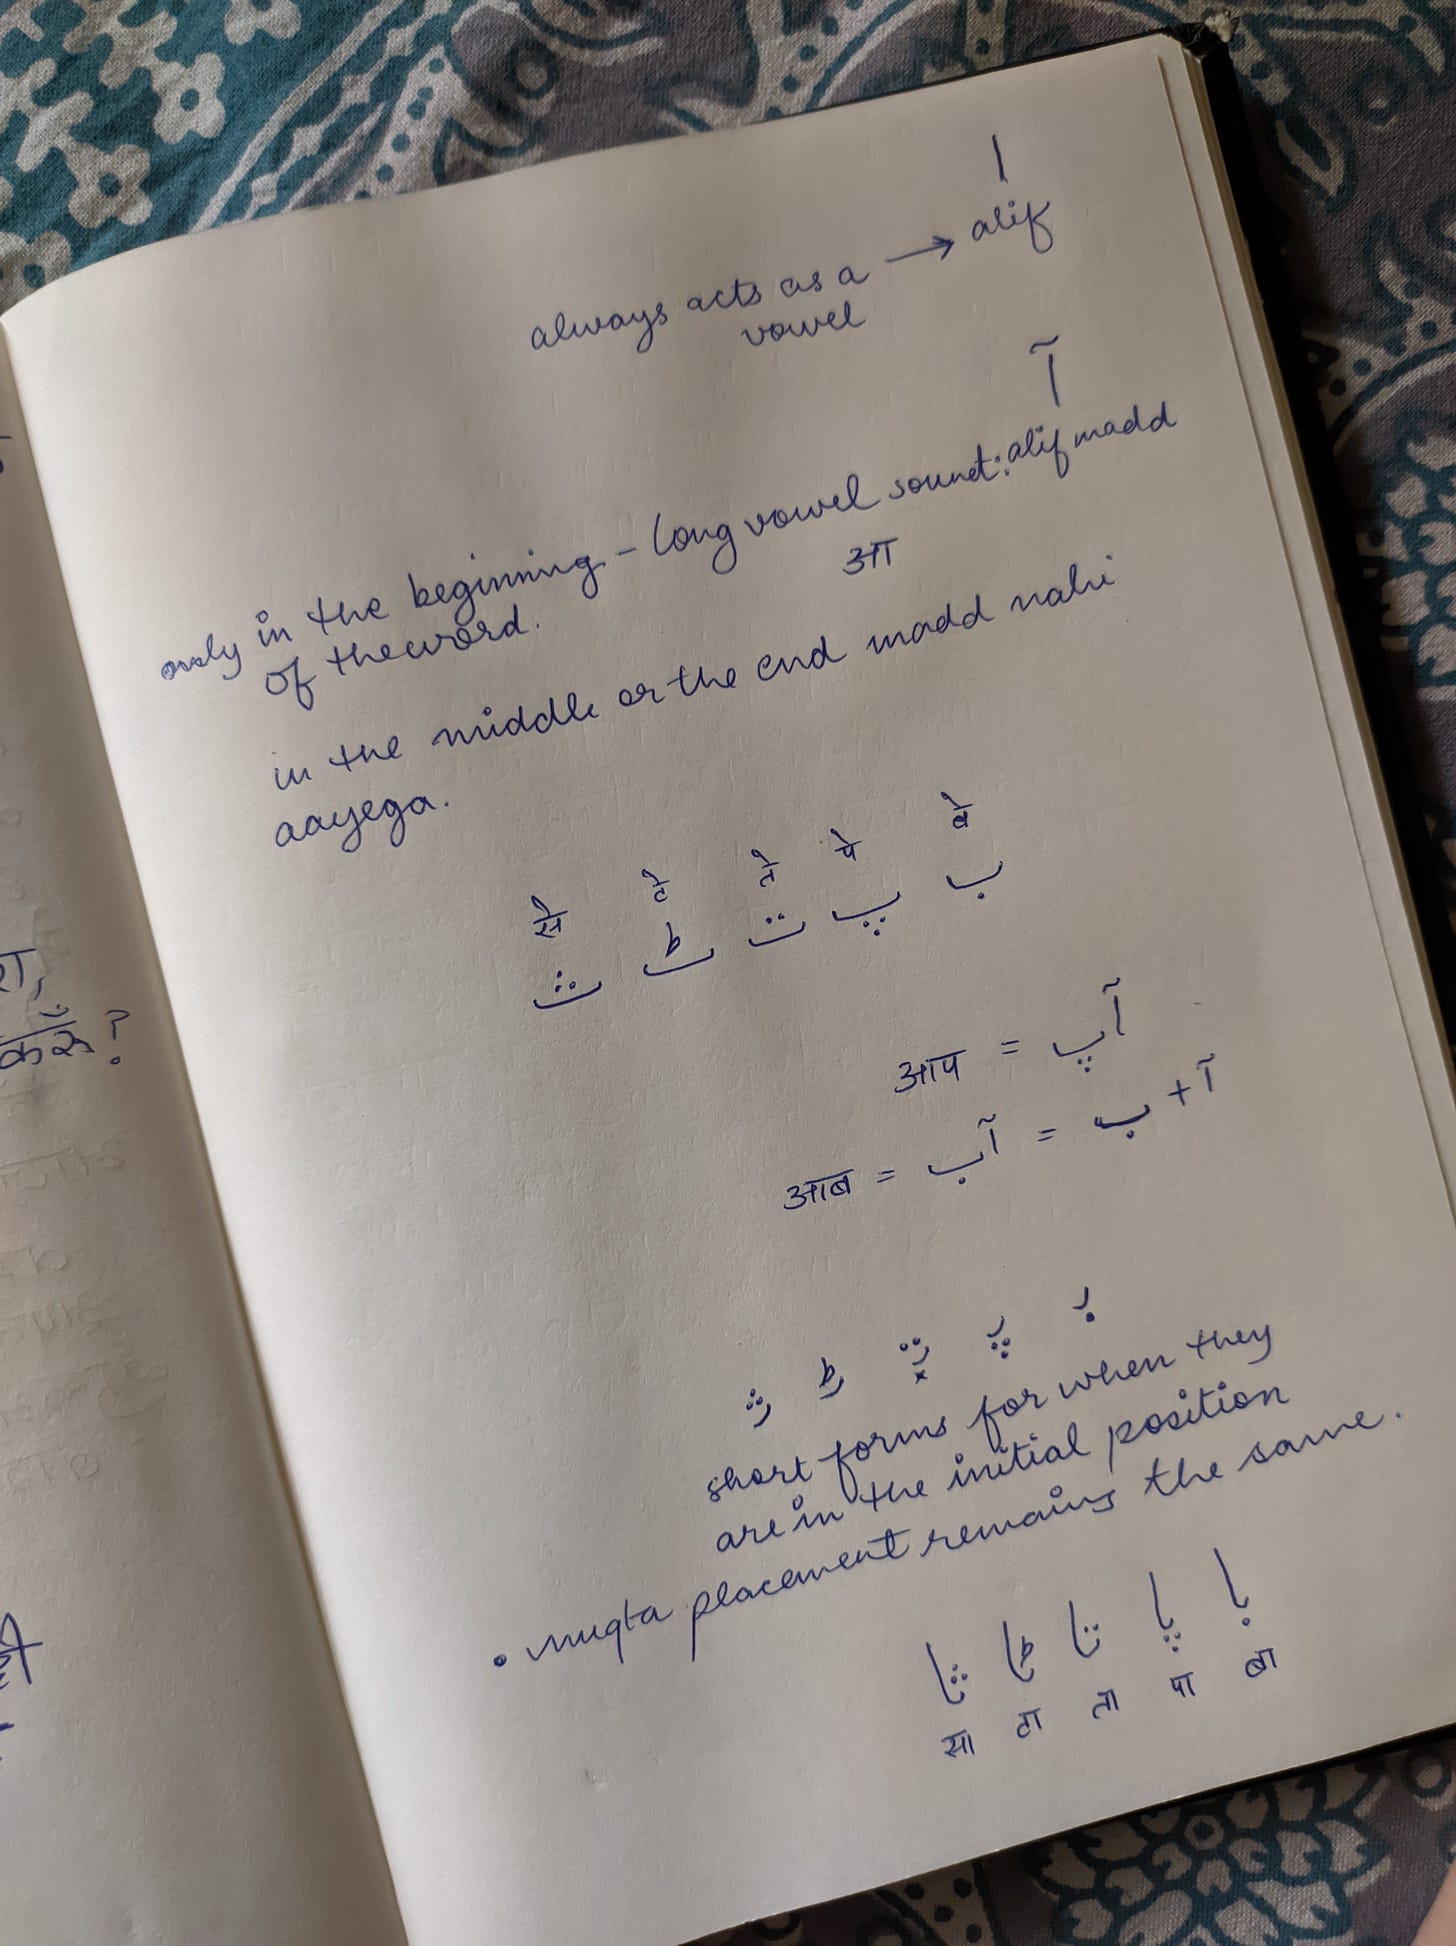 The Urdu alphabet written on a white notebook page with notes scribbled below them. 